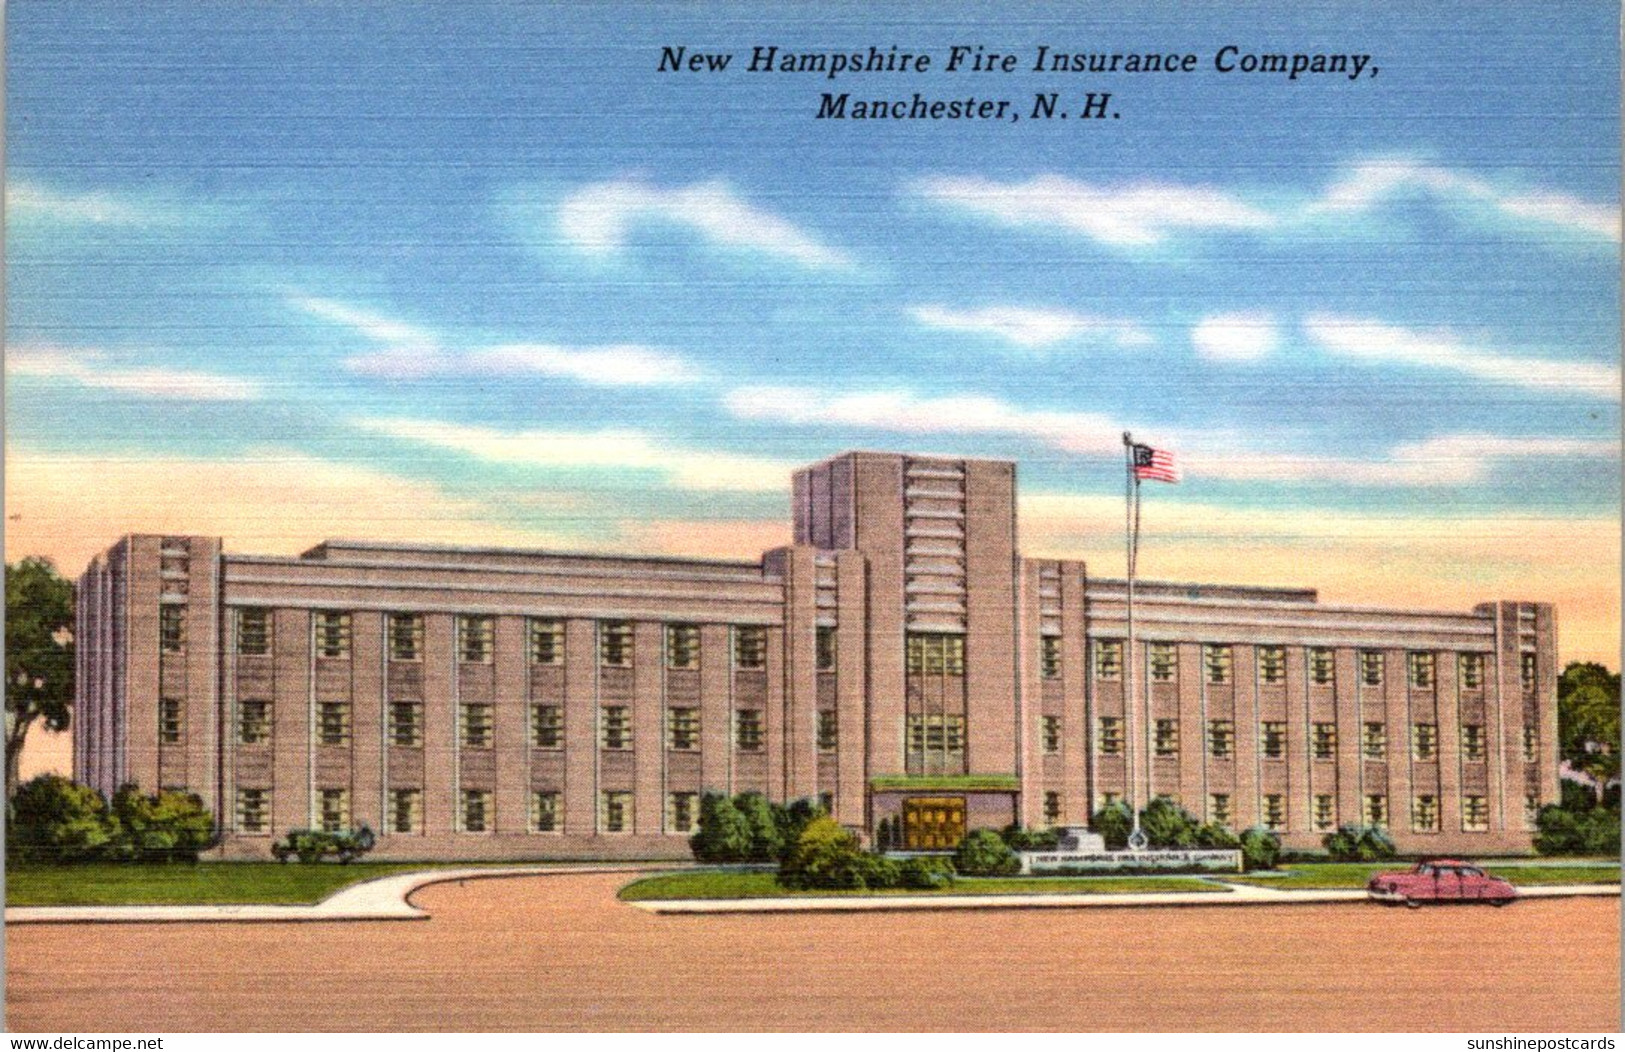 New Hampshire Manchester New Hampshire Fire Insurance Company - Manchester